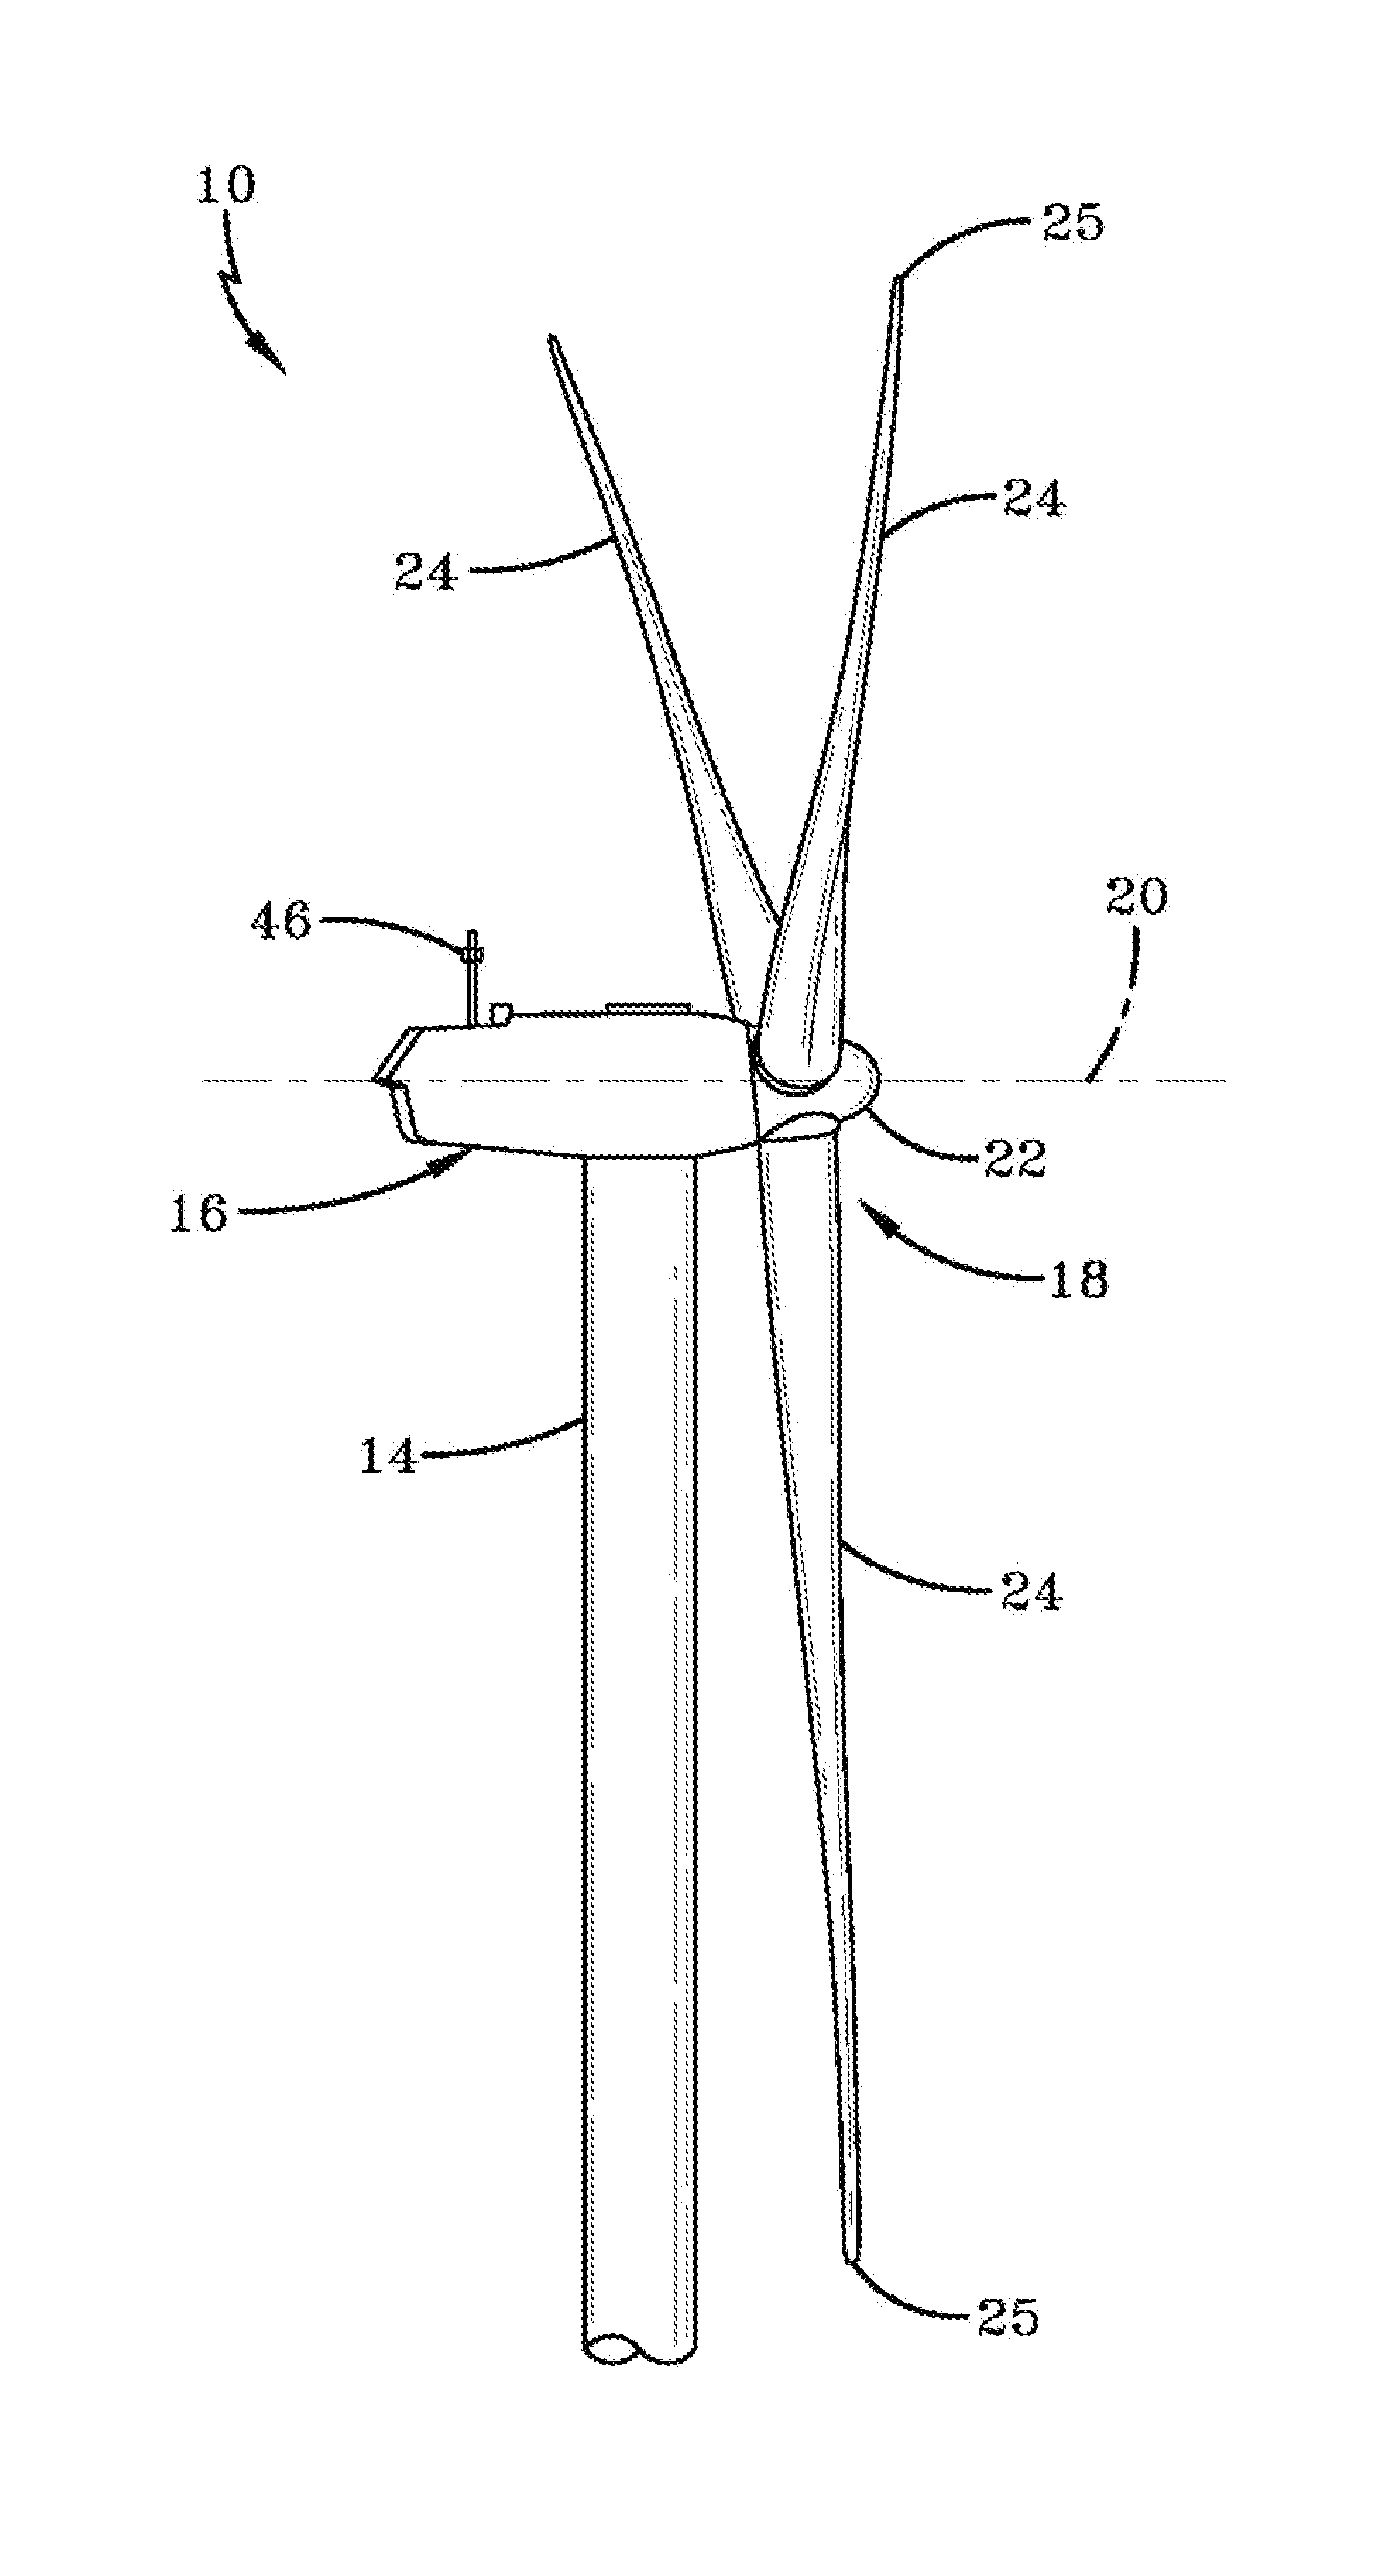 System and method of selecting wind turbine generators in a wind park for curtailment of output power to provide a wind reserve